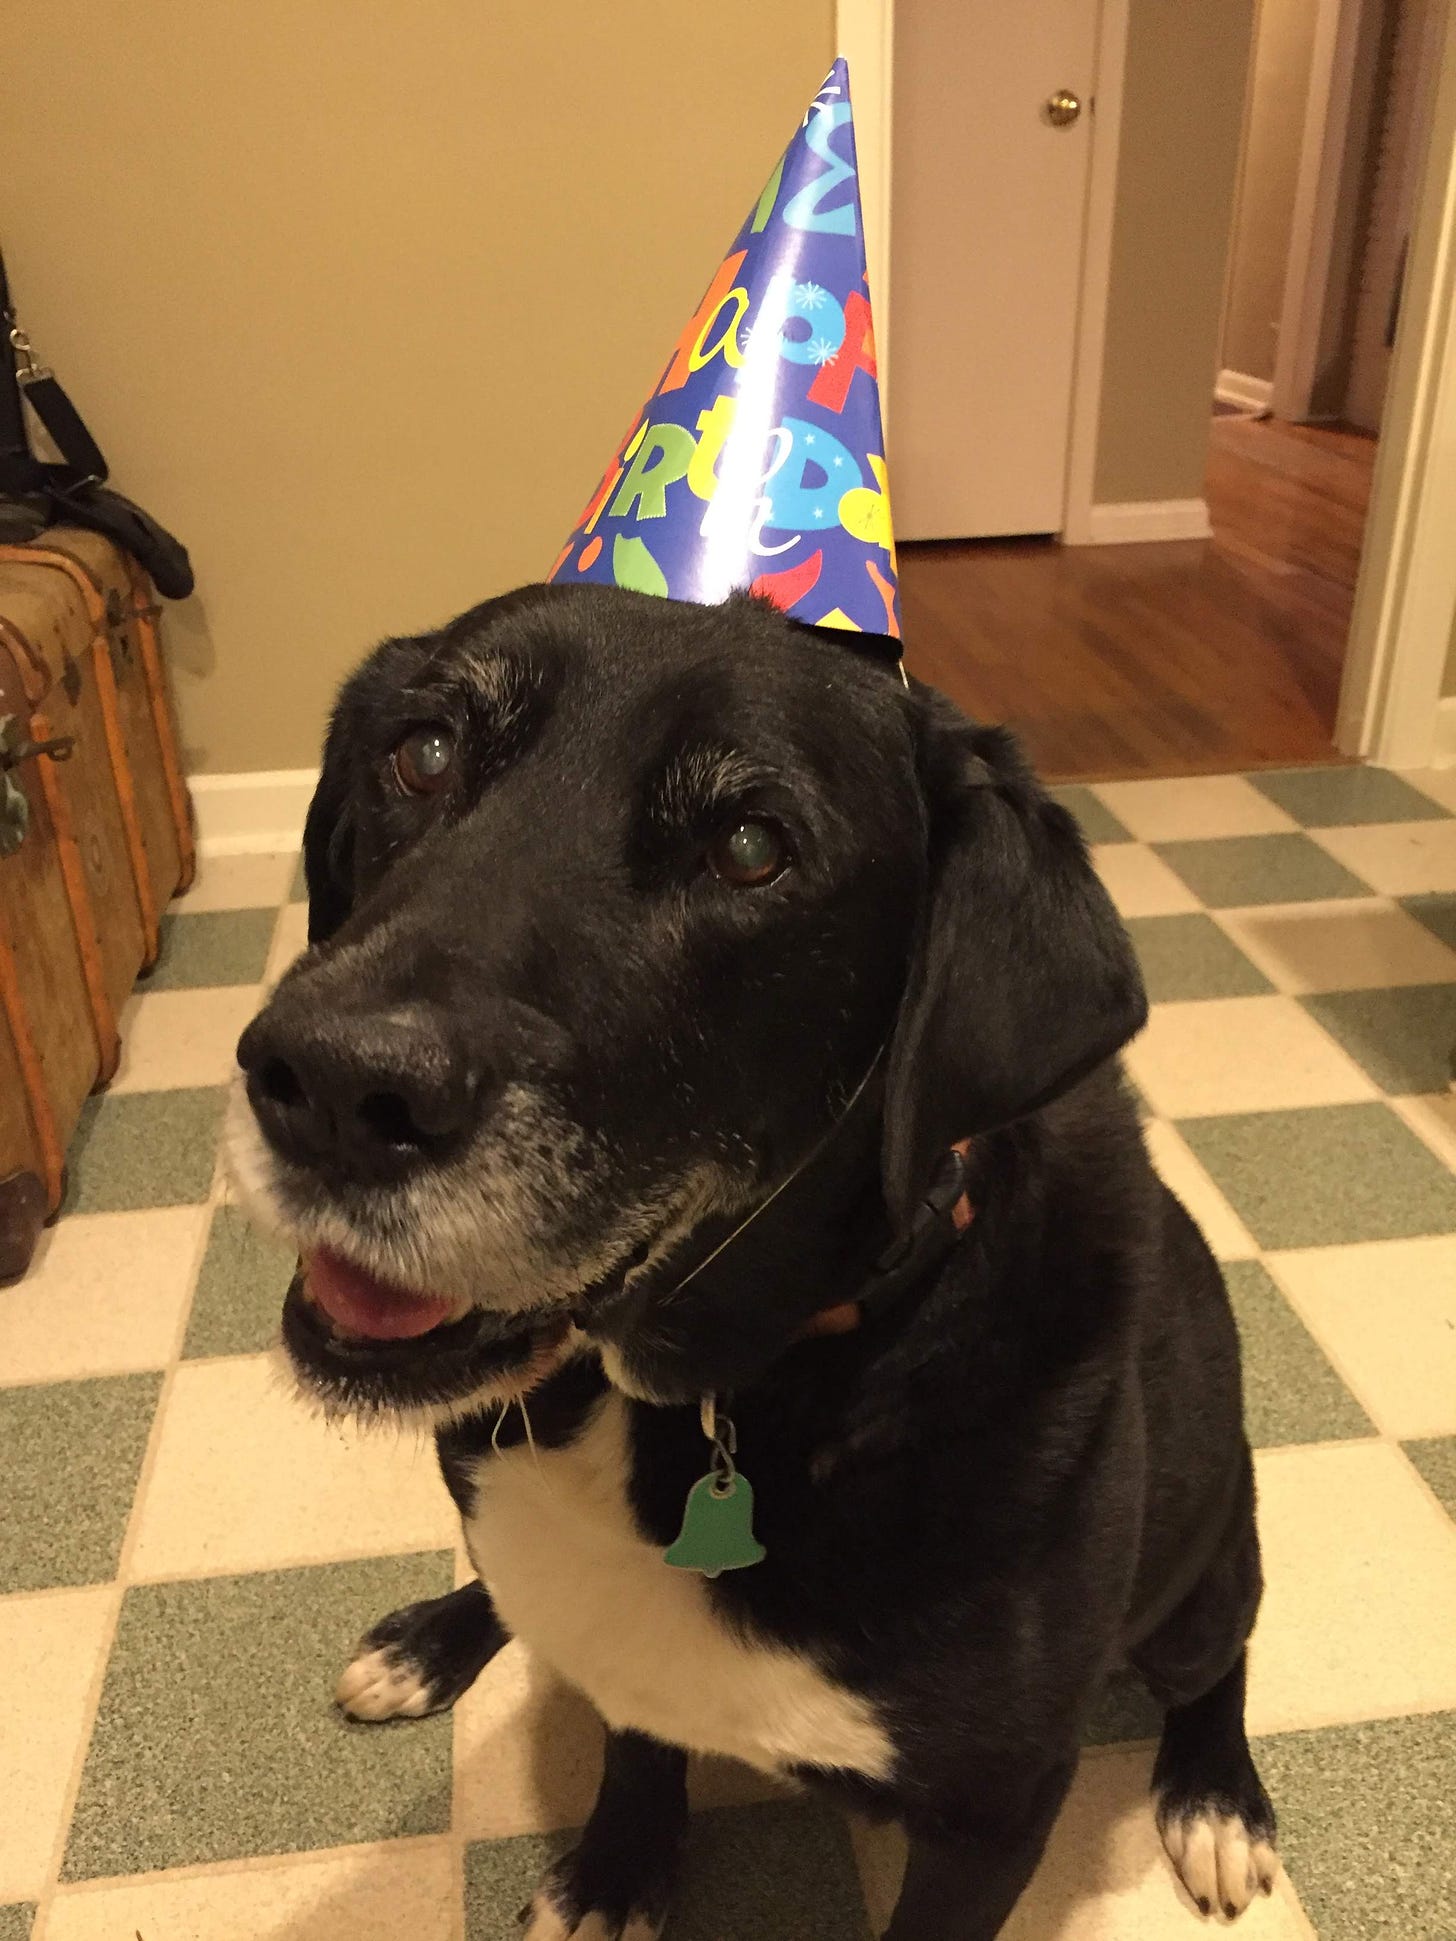 a picture of the same black dog as before, but this time he looks much older, with a white muzzle and eyebrows, as well as filmy cataracts over his eyes. He is wearing a child's pointy birthday party hat and sitting on the green and white checkered tile floor in a house